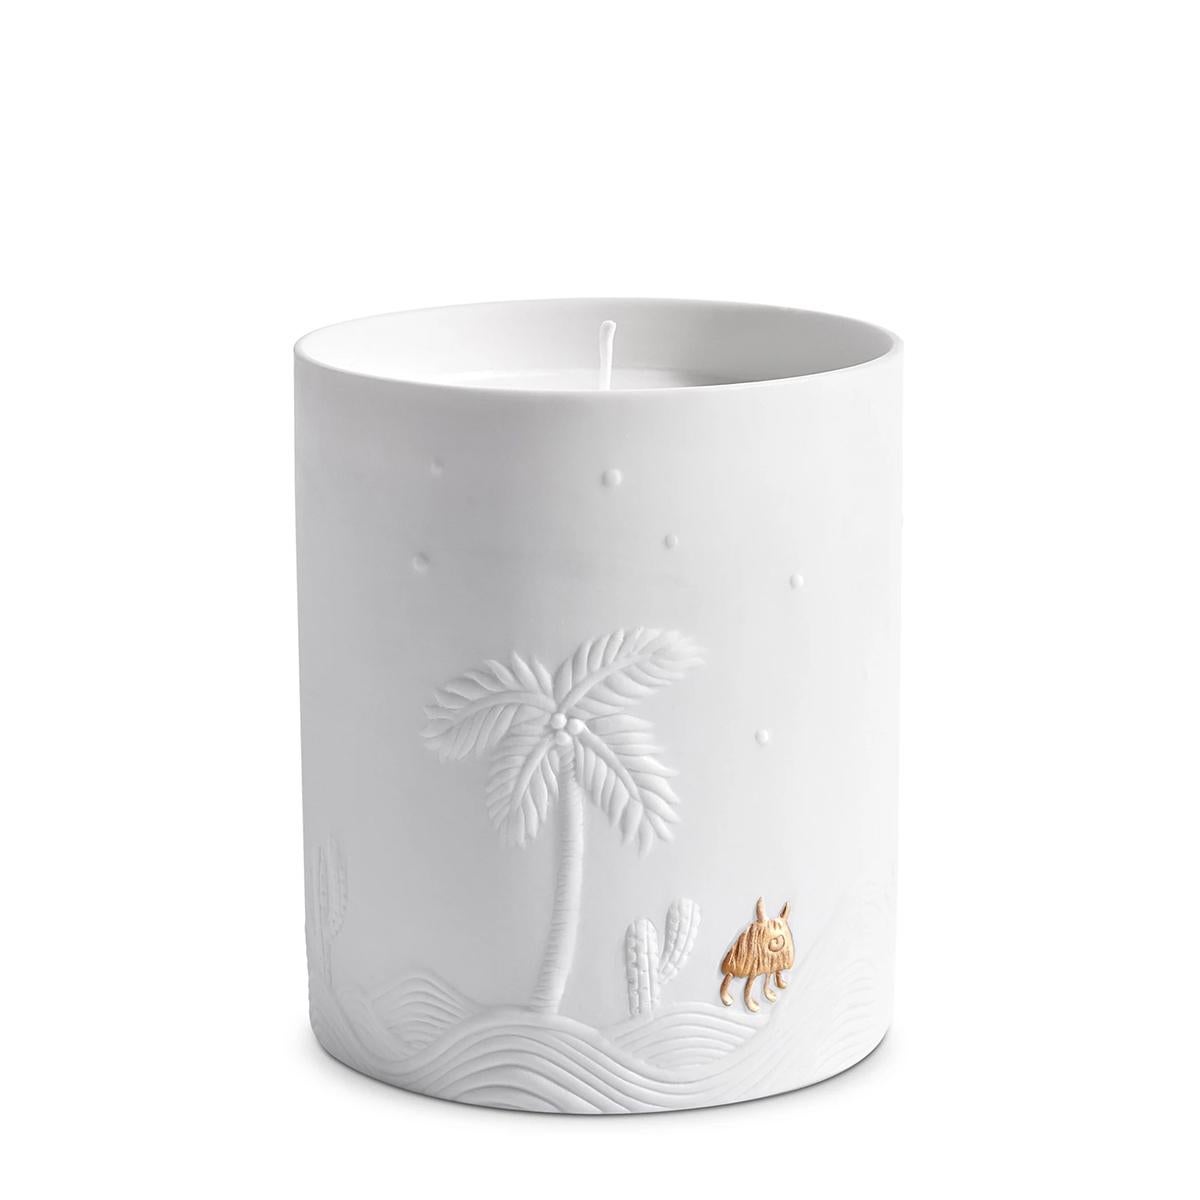 Candle Desert White made in porcelain. 
In white finish porcelain. Include paraffin wax 
with single wick. Delivered in a luxury gift box.